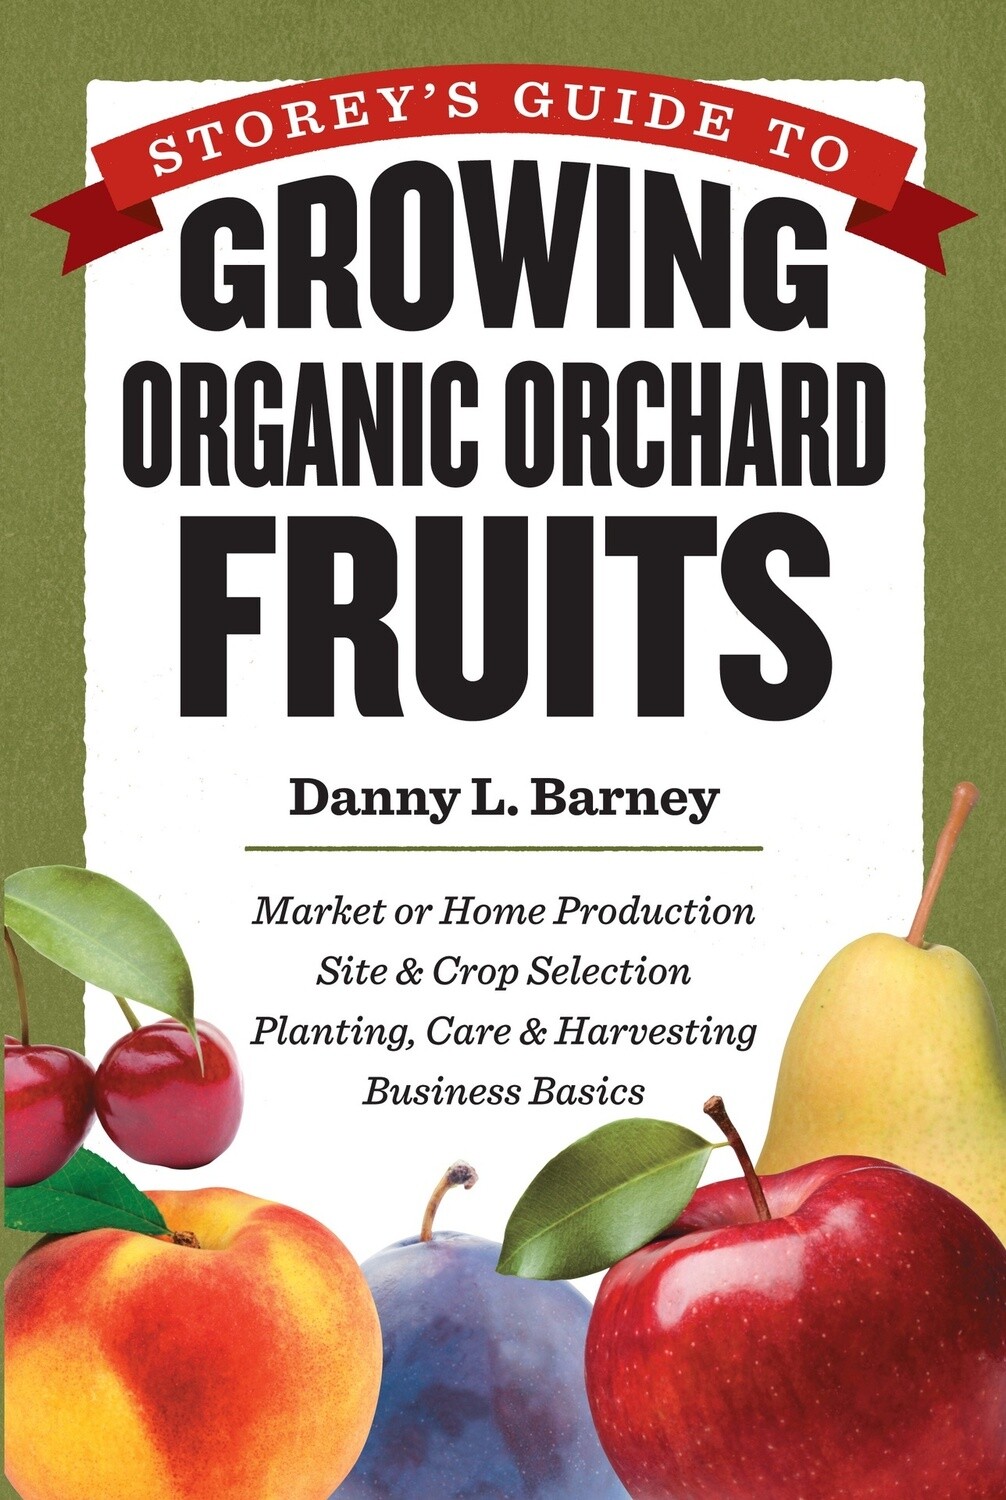 Storey's Guide to Growing Organic Orchard Fruits